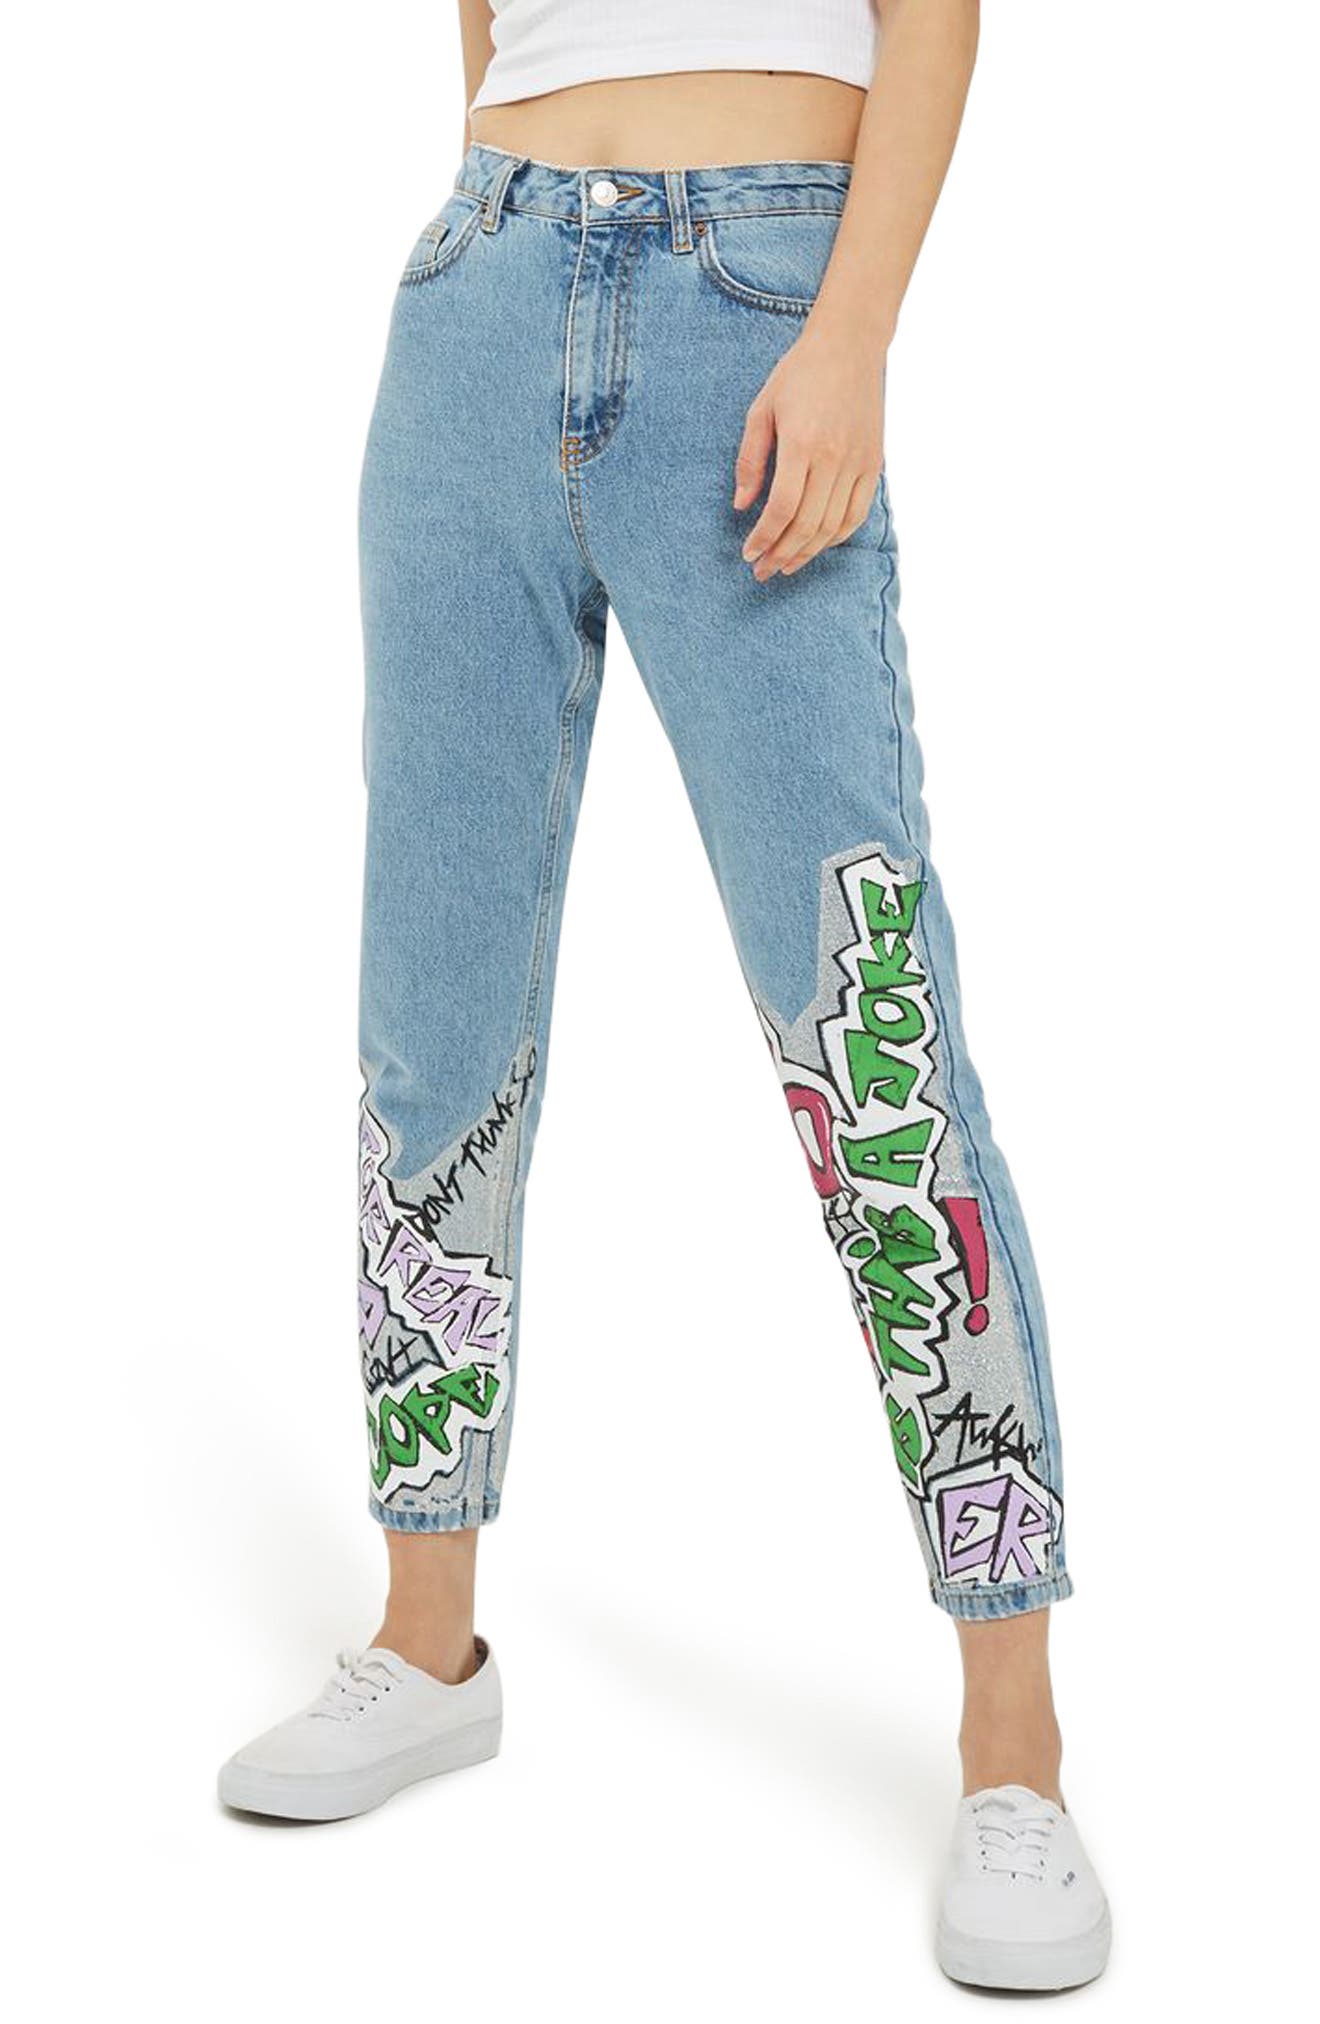 topshop sparkly jeans